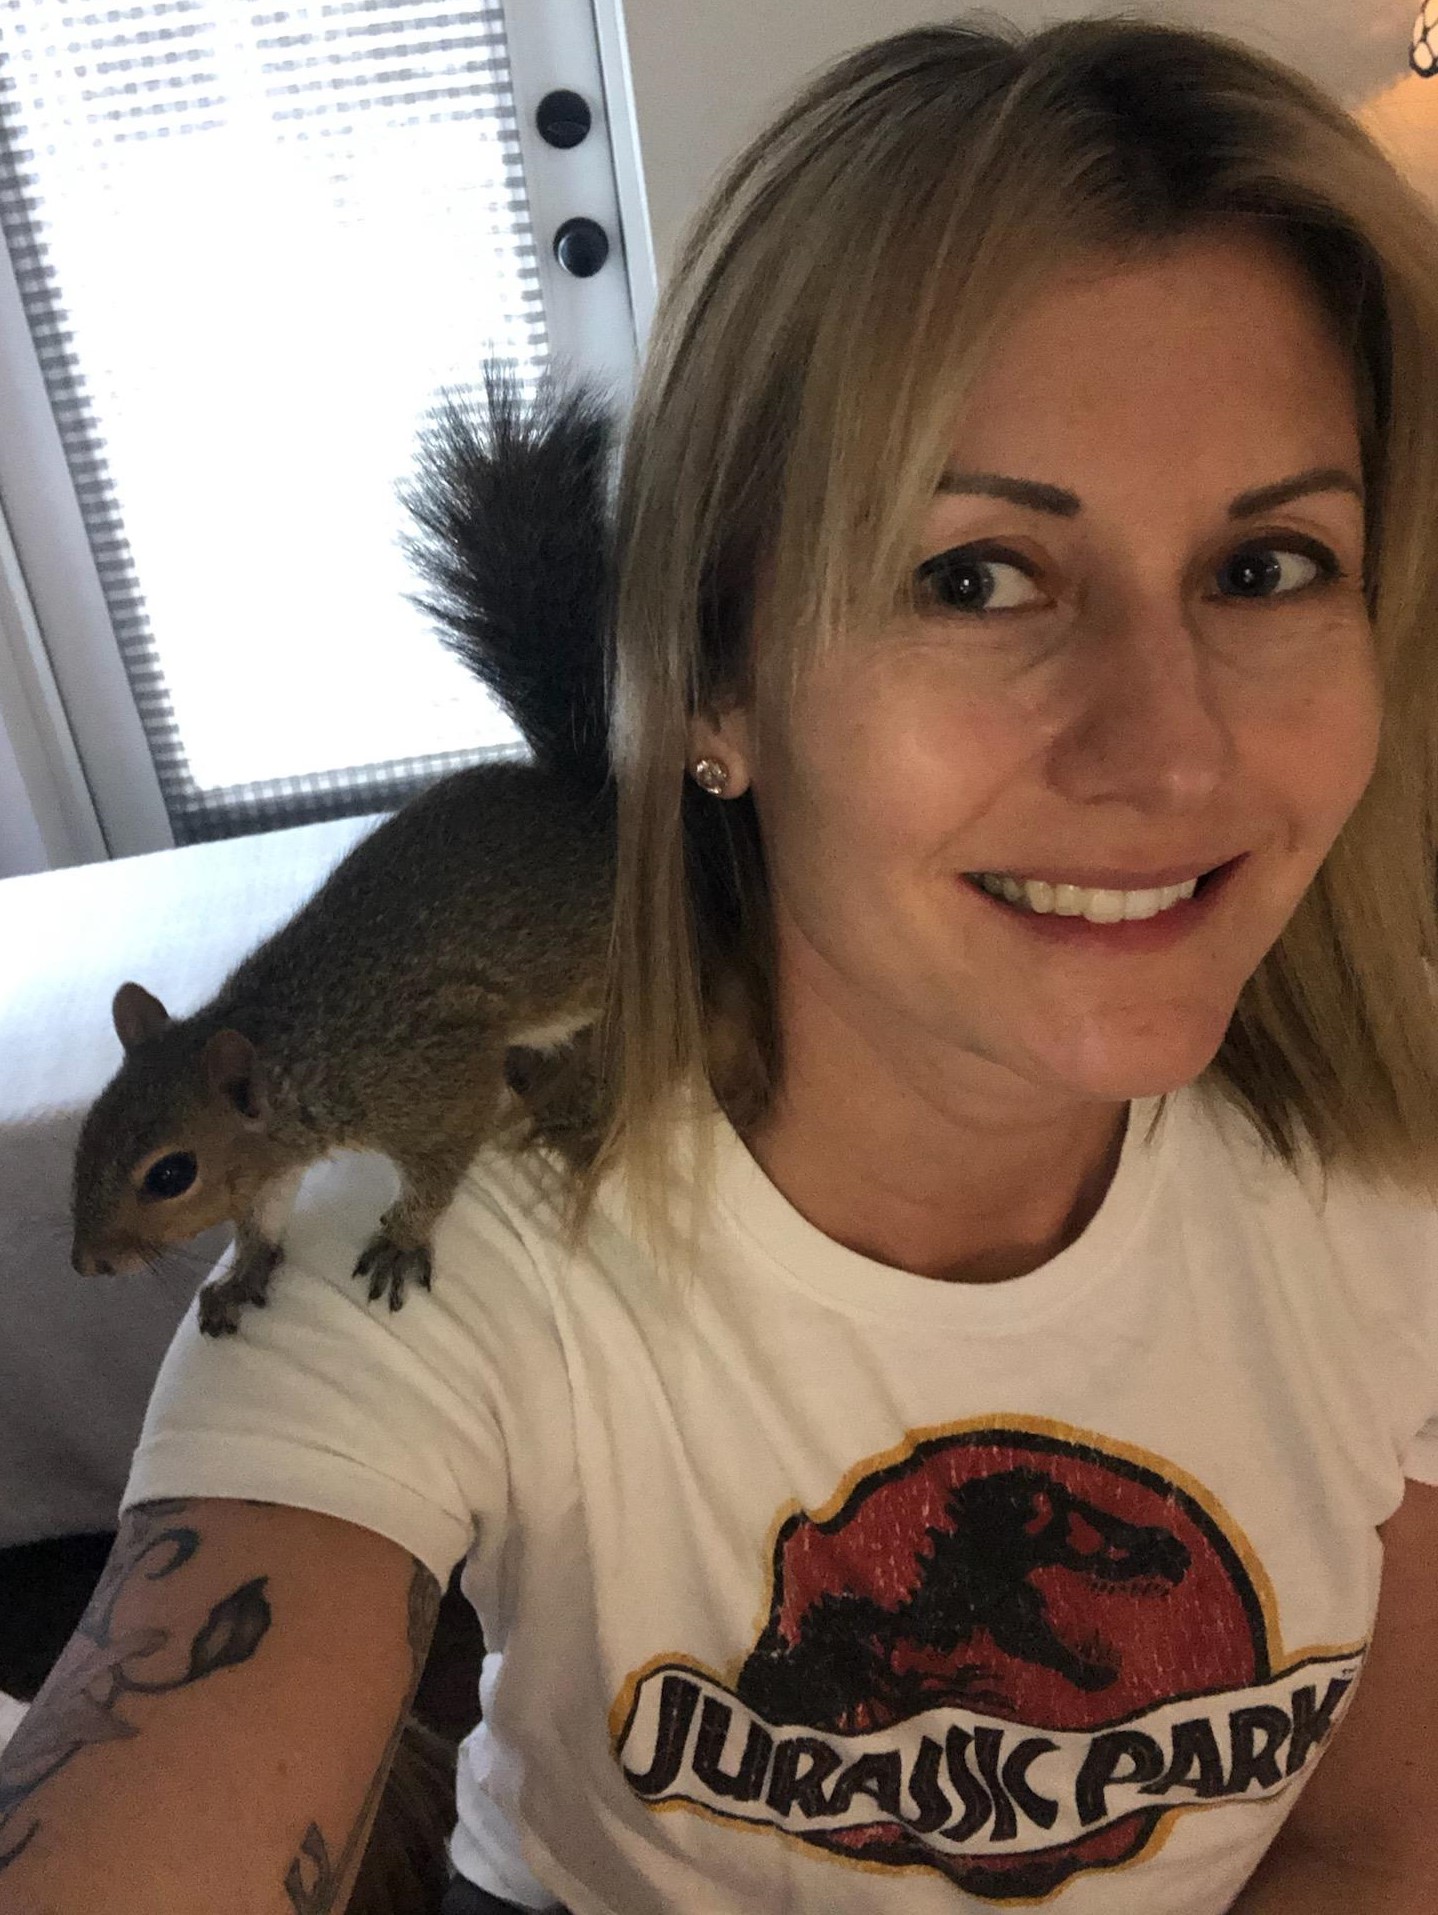 Jenn rescued and raised a baby squirrel